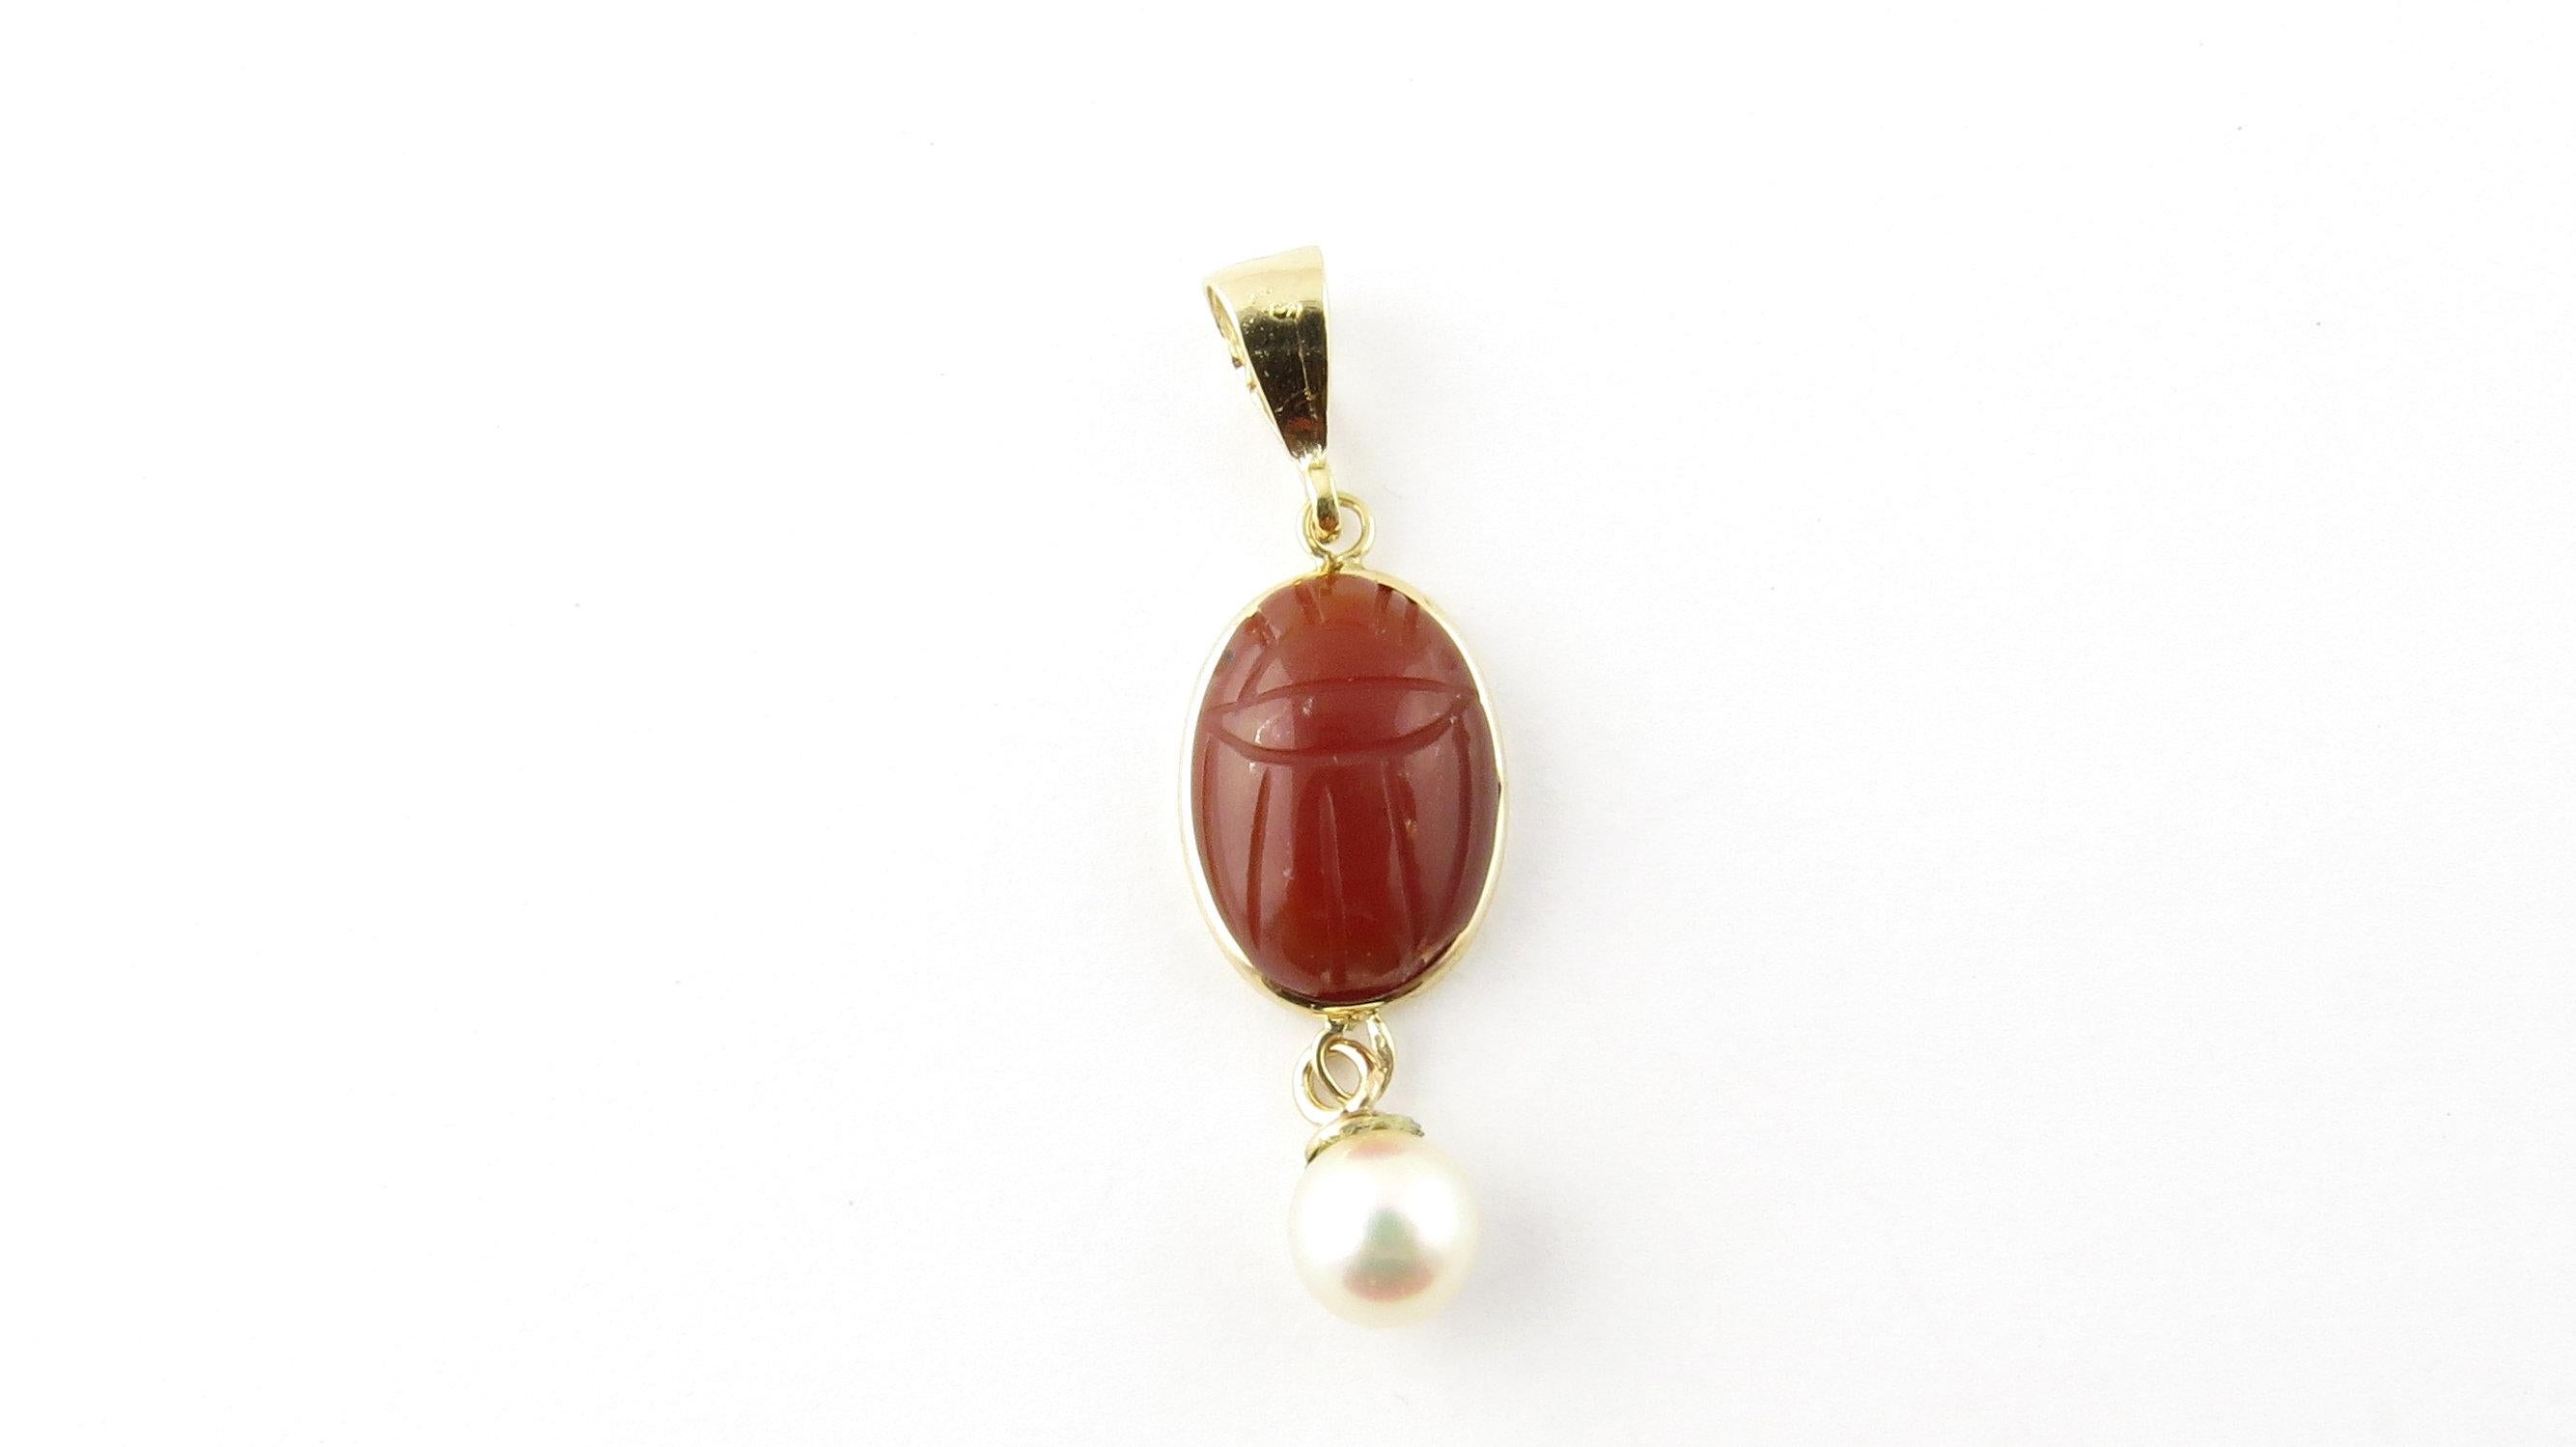 Vintage 14 Karat Yellow Gold Carrnelian Scarab and Pearl Pendant- 
This lovely pendant features a carrnelian scarab (14 mm x 11 mm) set in beautifully detailed 14K yellow gold accented with a dangling 6 mm white pearl. 
Size: 26 mm x 11 mm 
Weight: